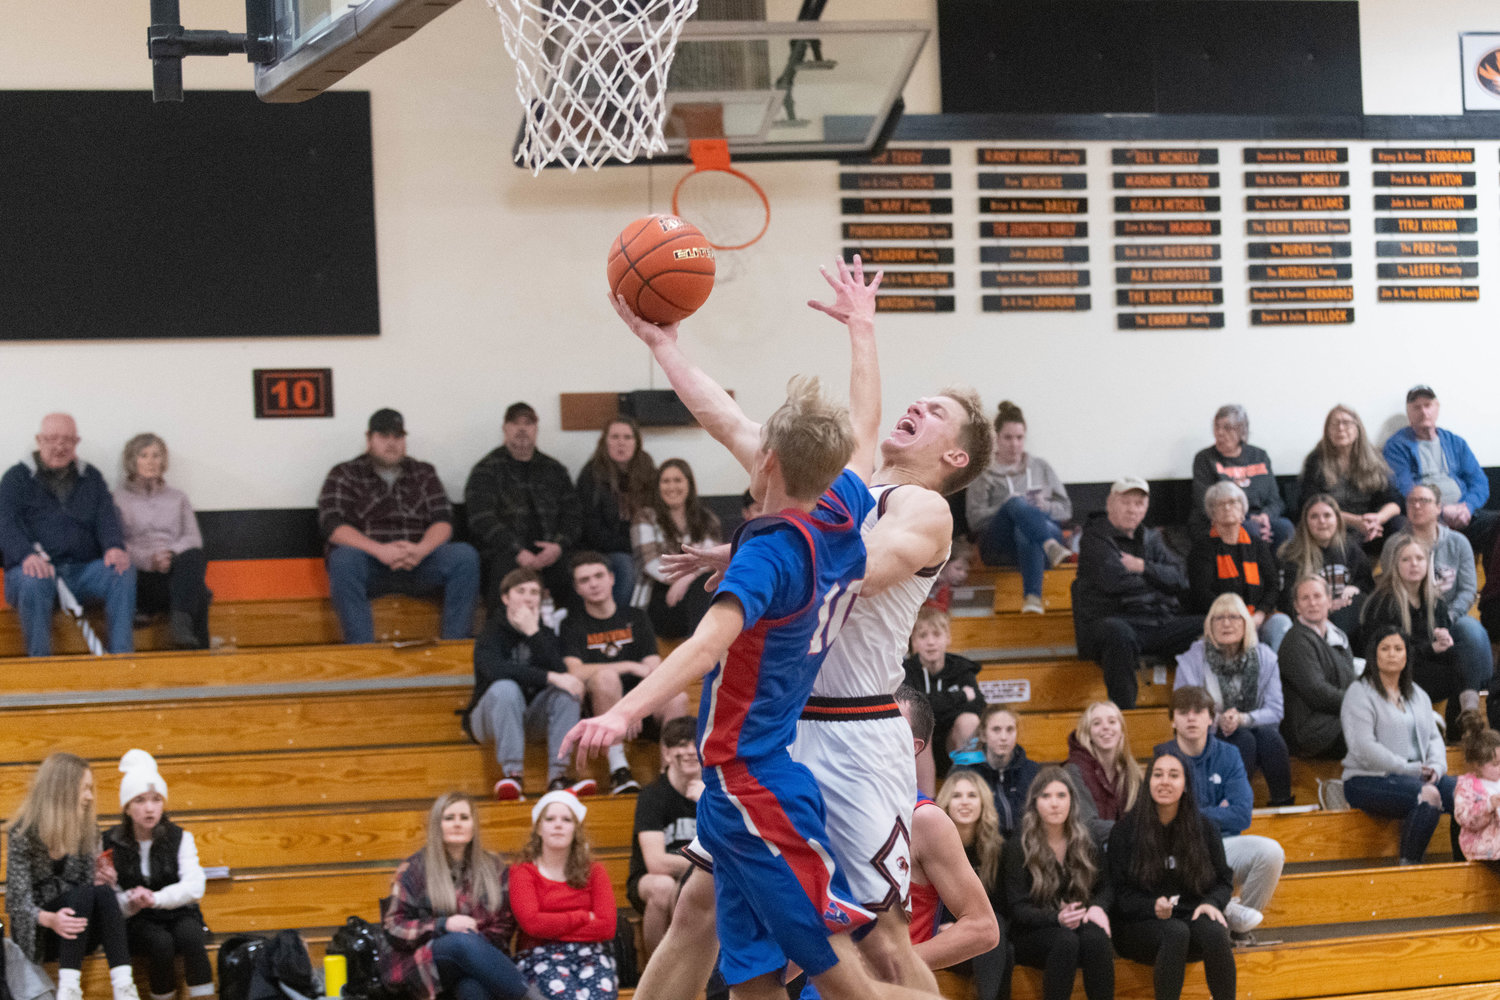 Cael Stanley fights through contact for a transition layup during the first half of Napavine's 81-50 win over Willapa Valley on Dec. 27.